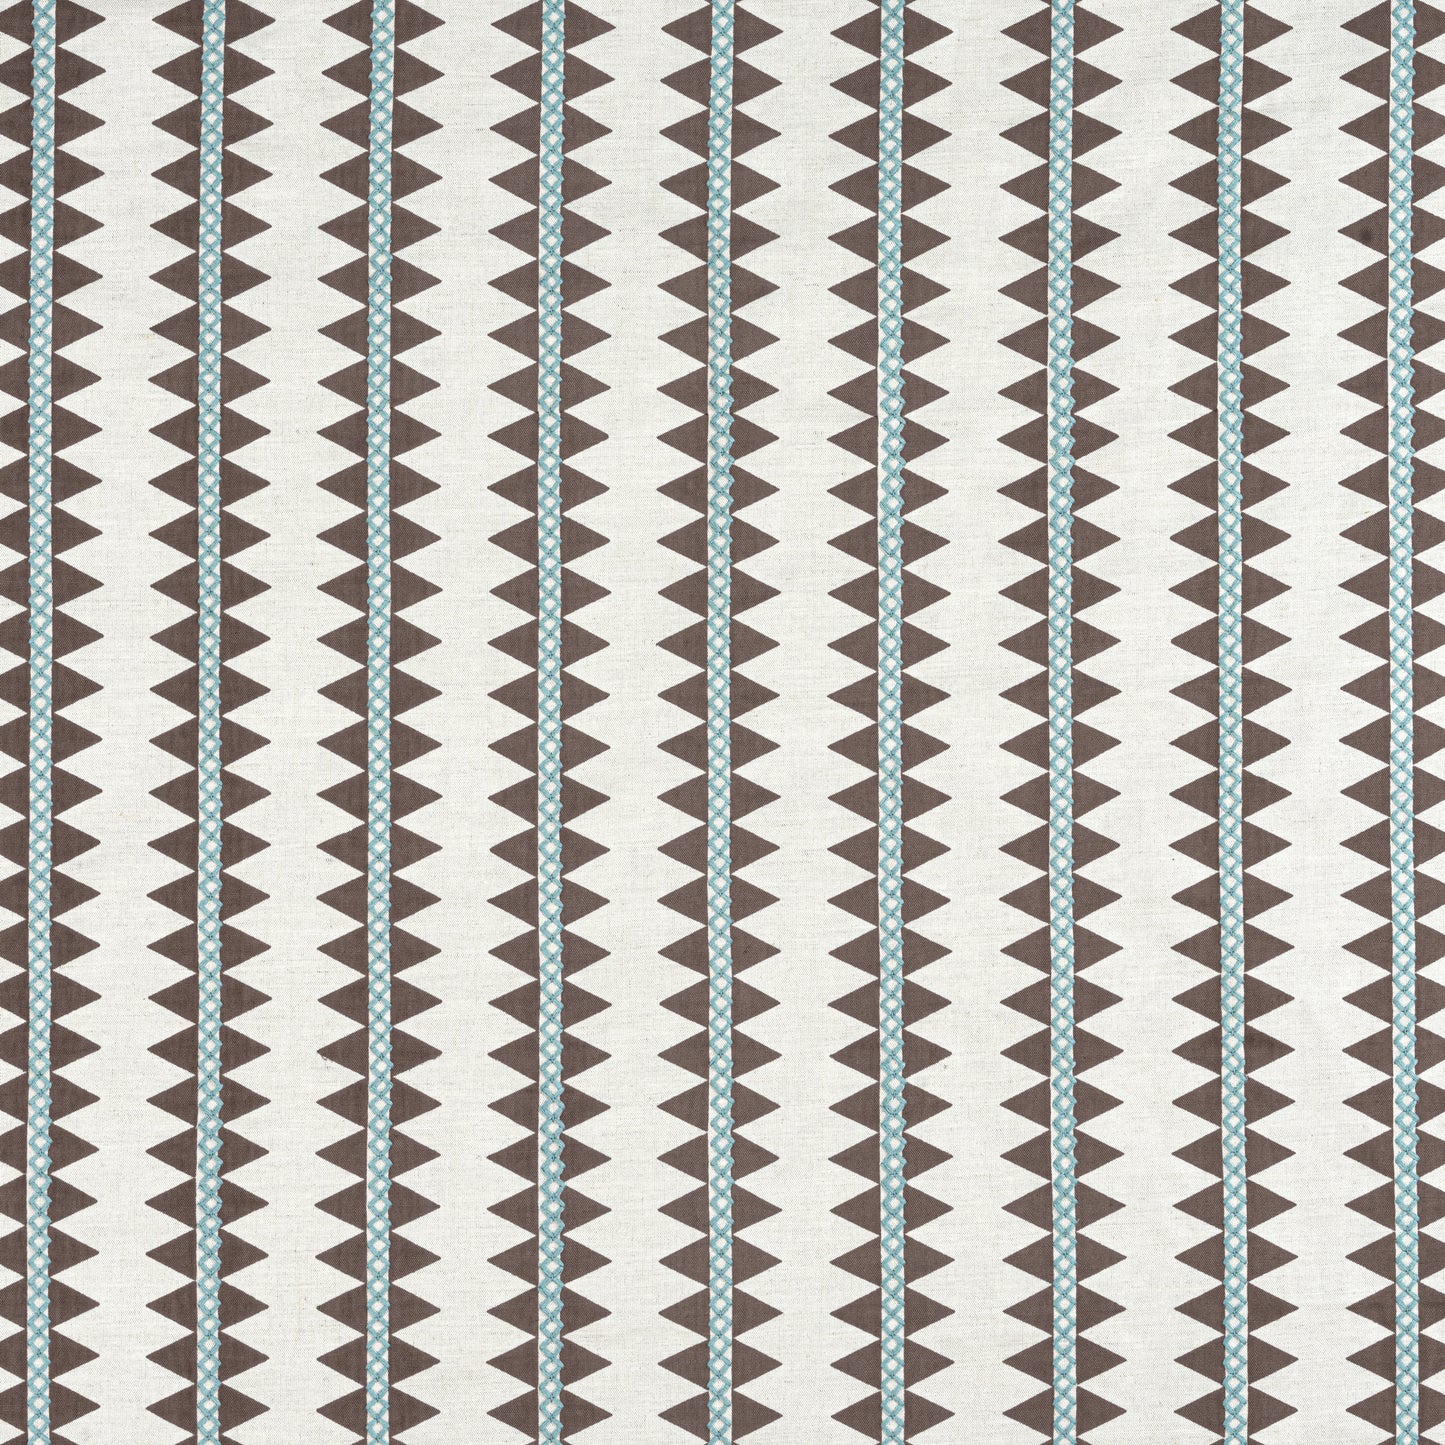 Purchase Thibaut Fabric SKU W713246 pattern name Reno Stripe Embroidery color Brown